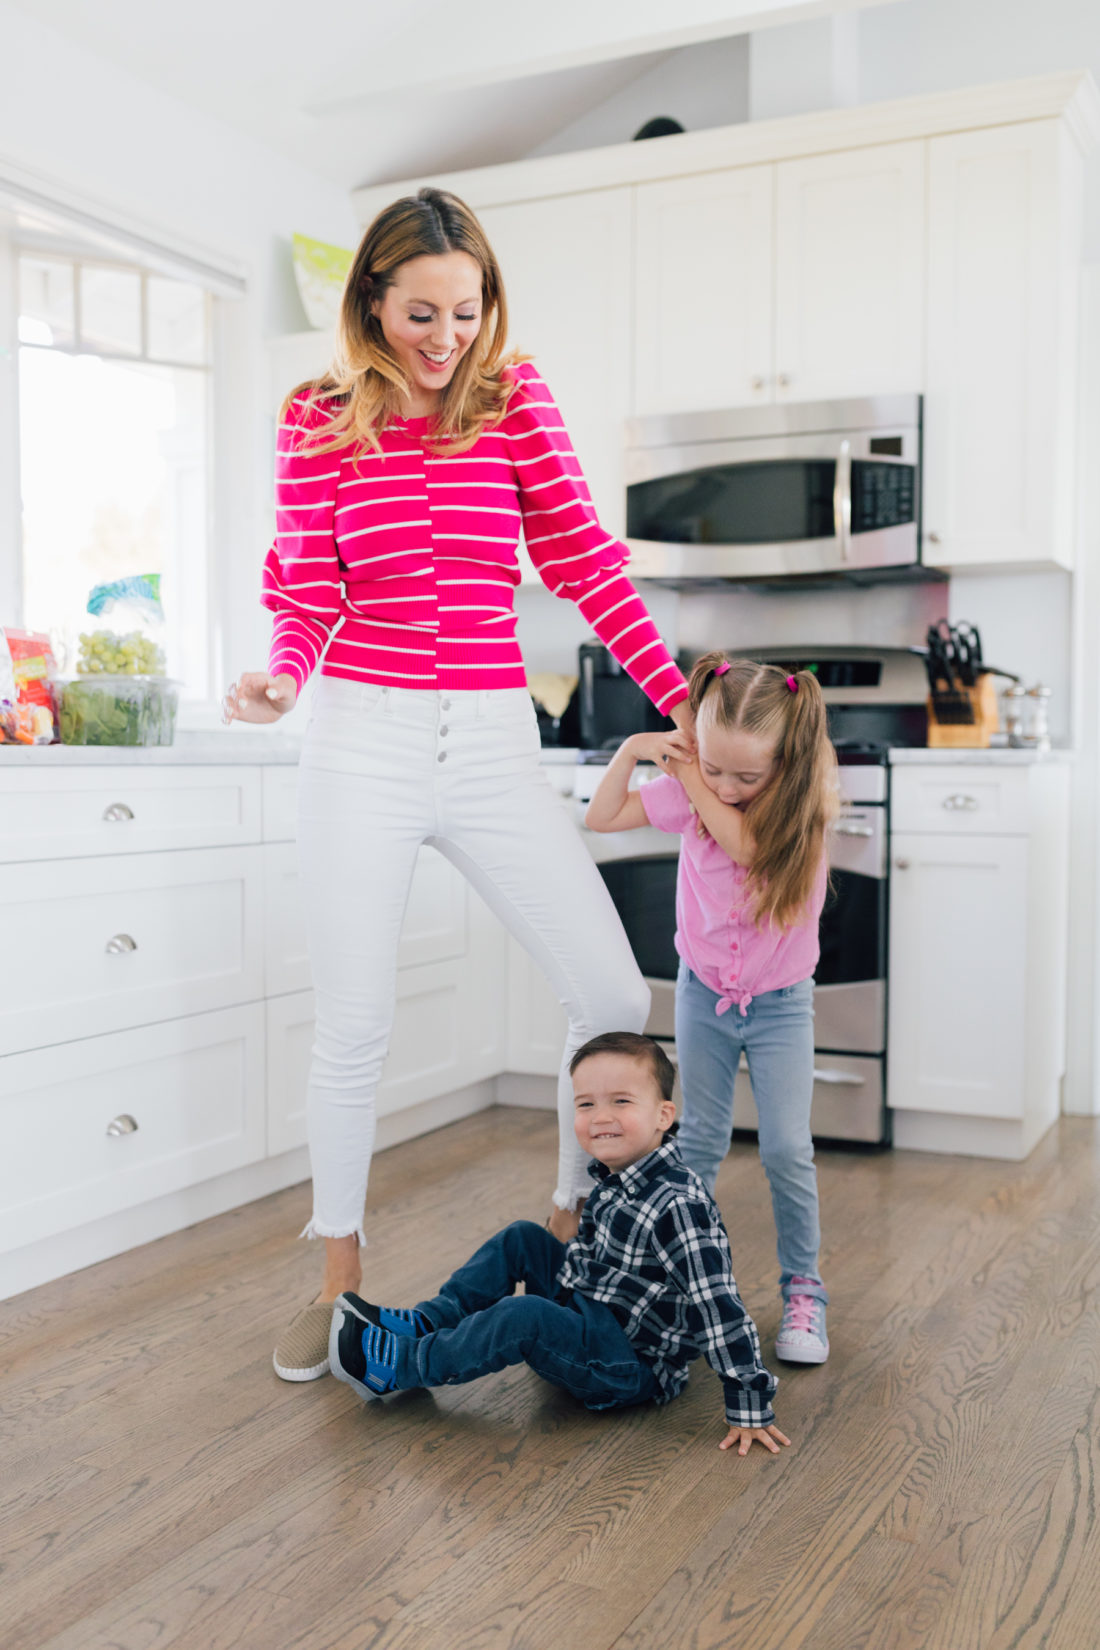 Eva Amurri Martino of Happily Eva After wears Sketchers wears Sepulvada Blvd a la Mode Slip-On in the kitchen with her kids Marlowe and Major